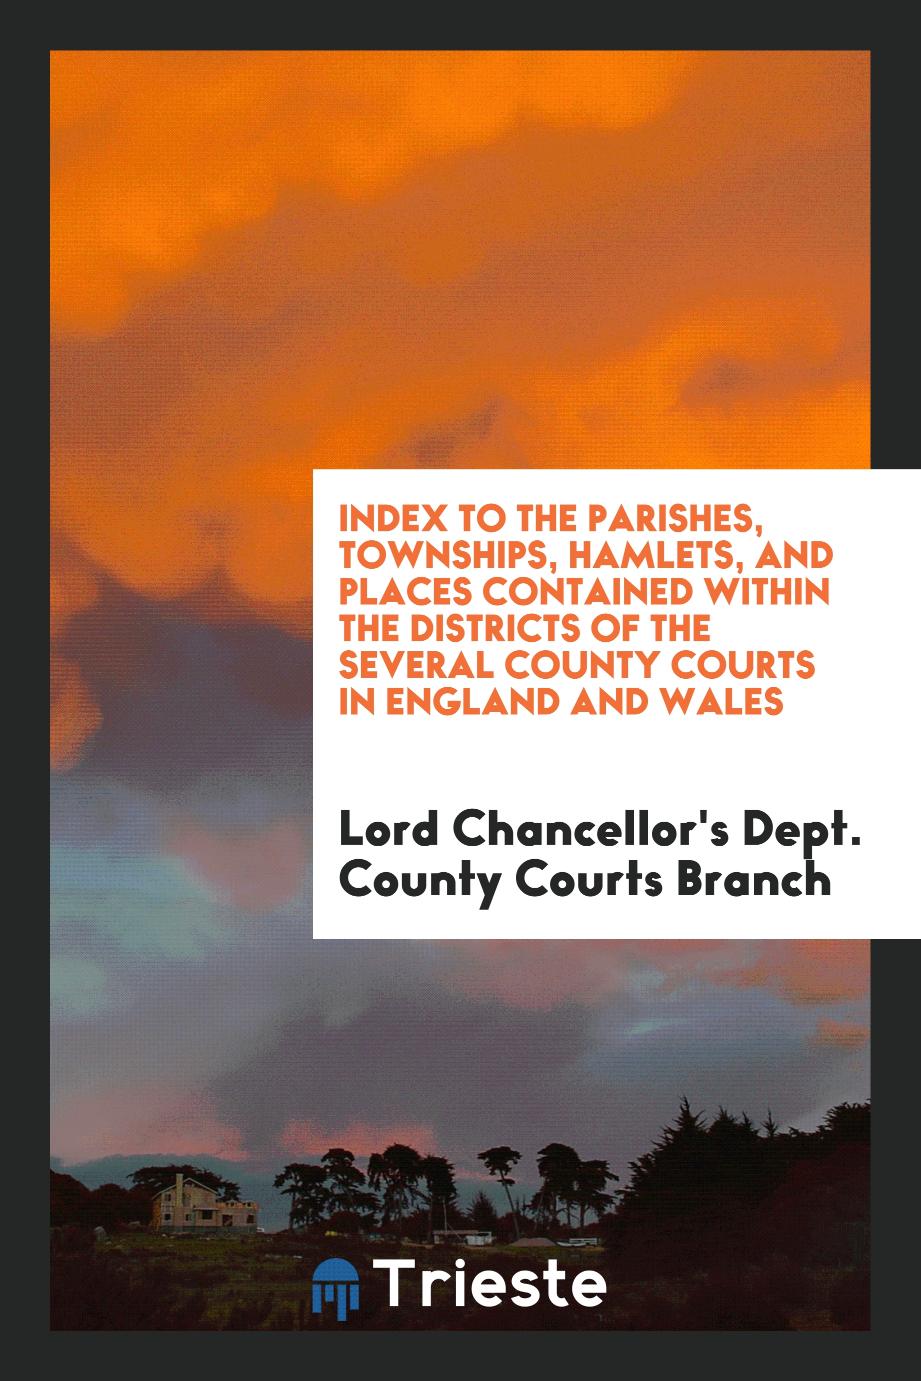 Index to the Parishes, Townships, Hamlets, and Places Contained within the Districts of the Several County Courts in England and Wales